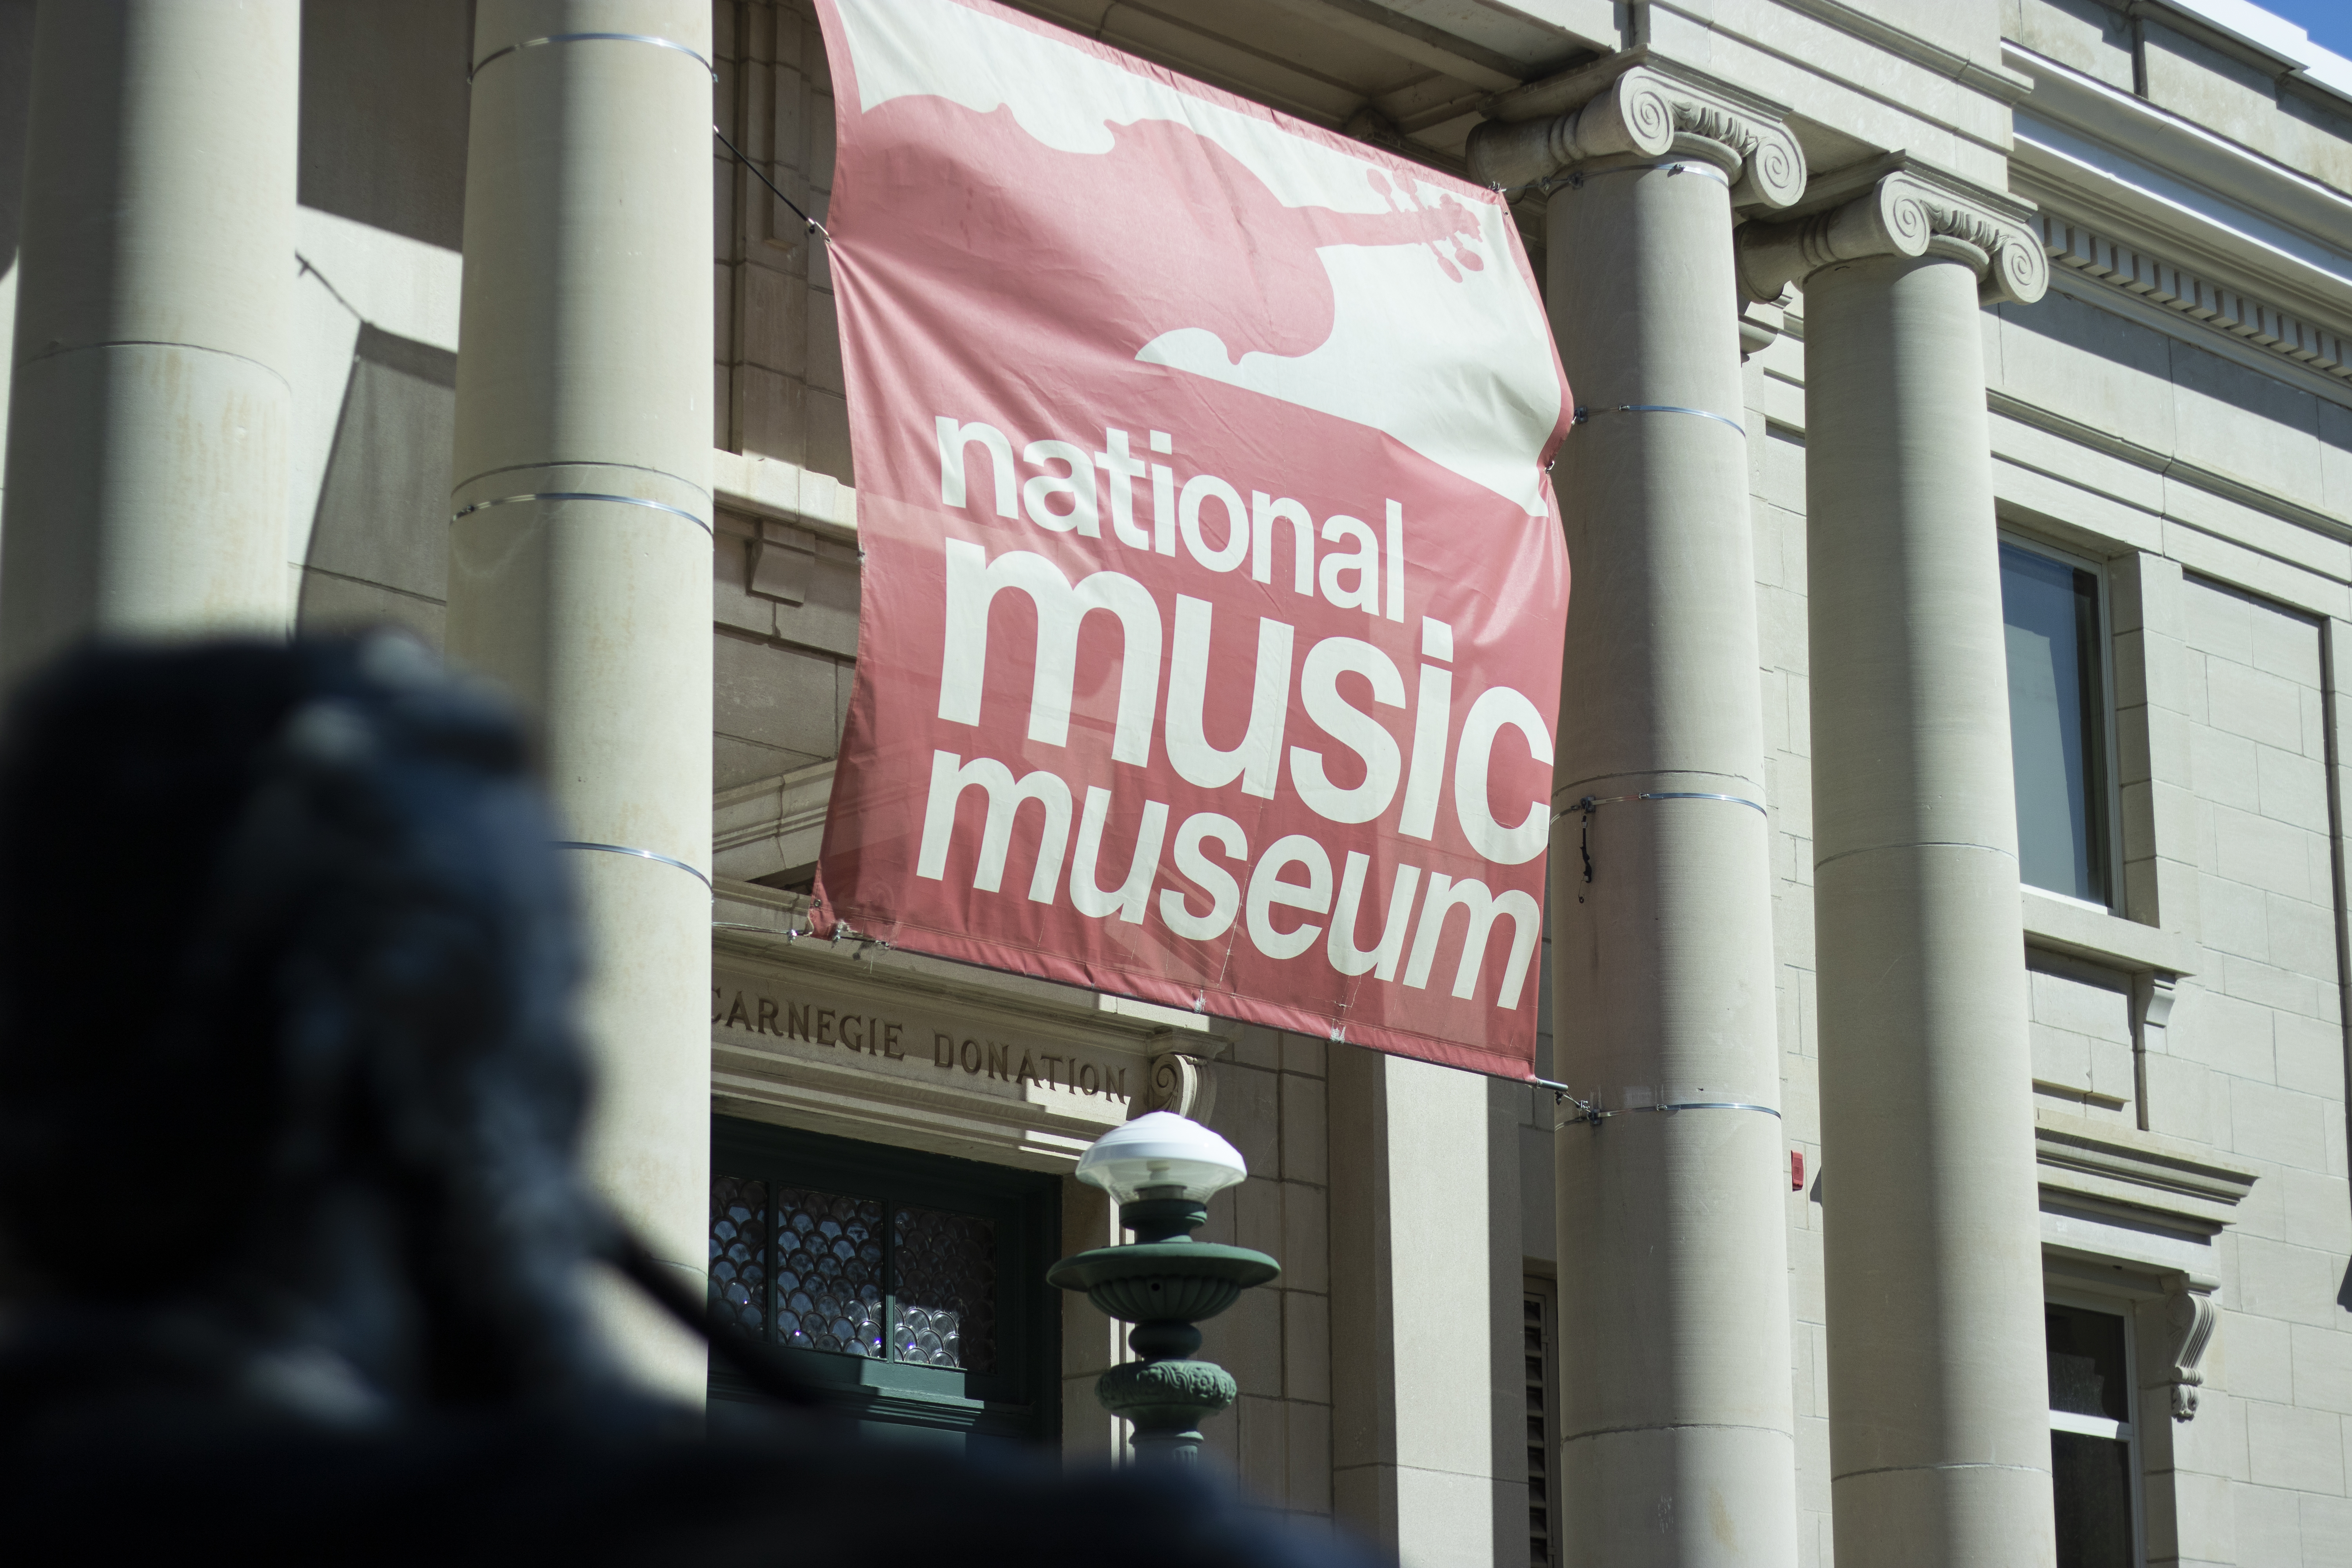 National Music Museum receives funds from Vermillion City Council